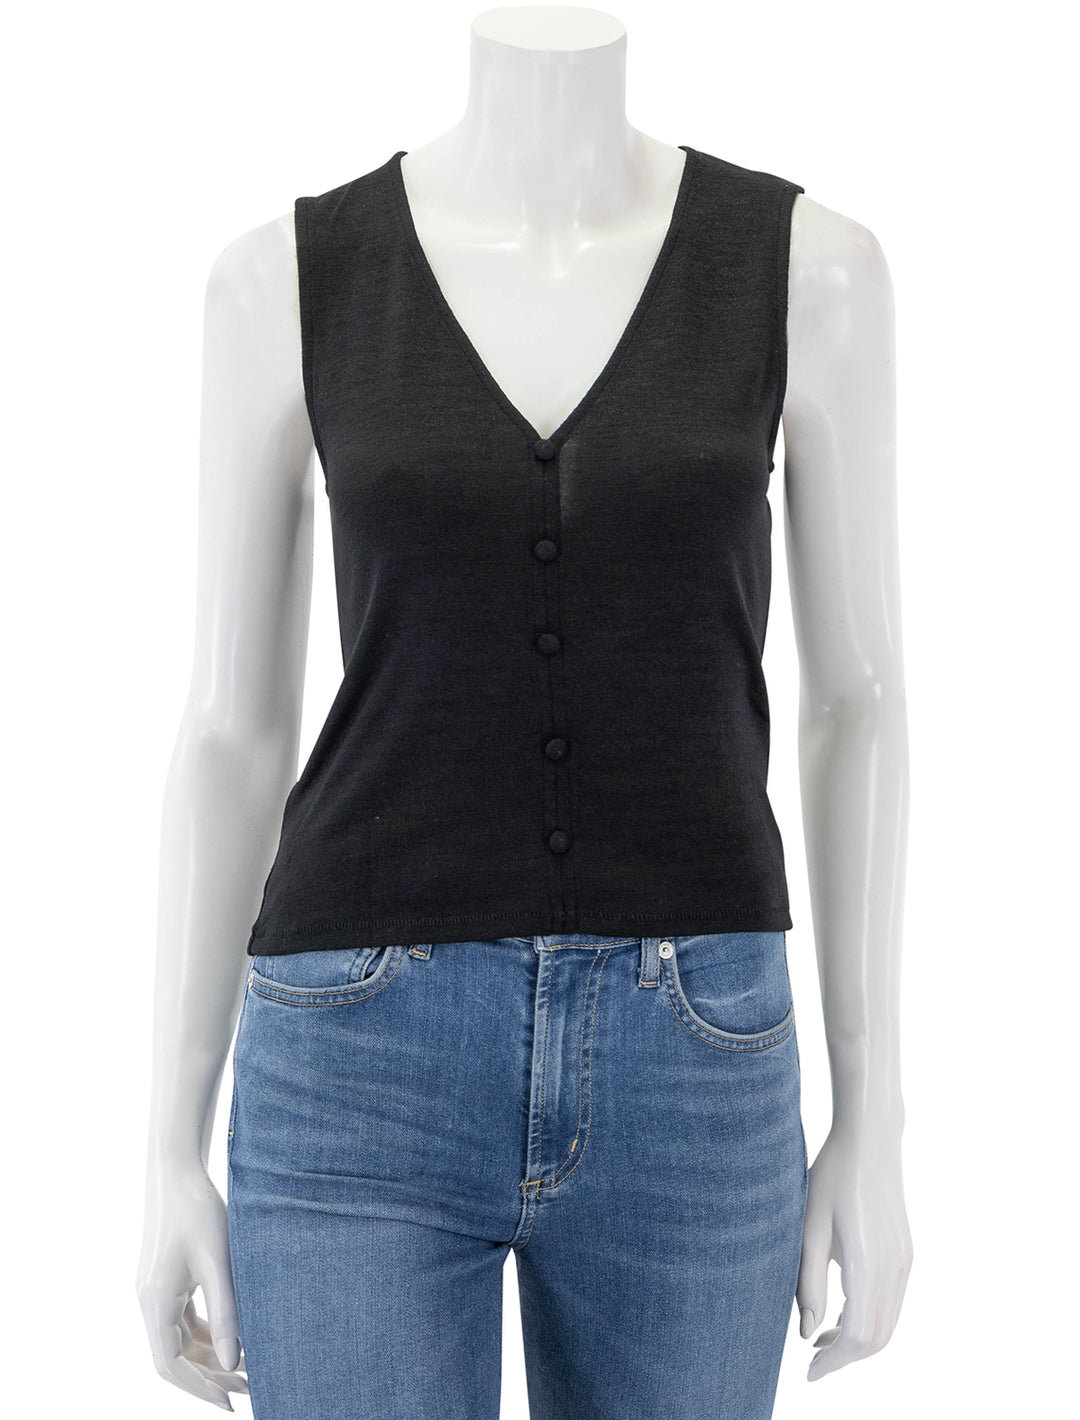 Front view of Rag & Bone's the knit button up tank in black.